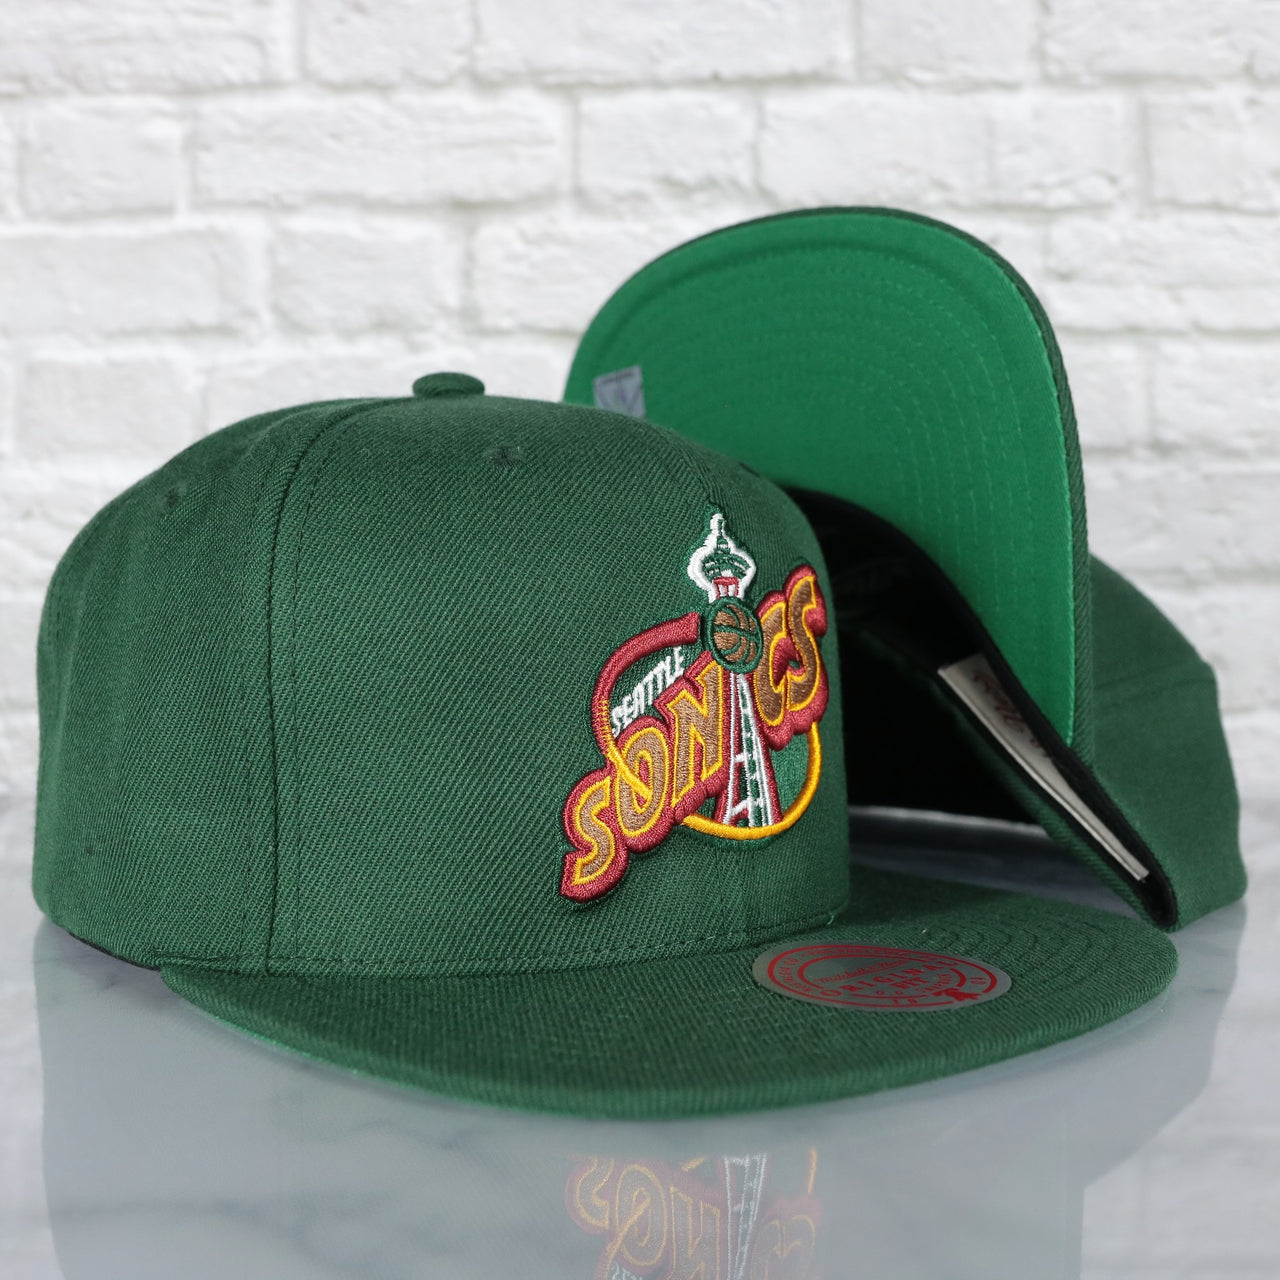 Seattle Supersonics Vintage Retro NBA Team Ground 2.0 Mitchell and Ness Snapback Hat | Green